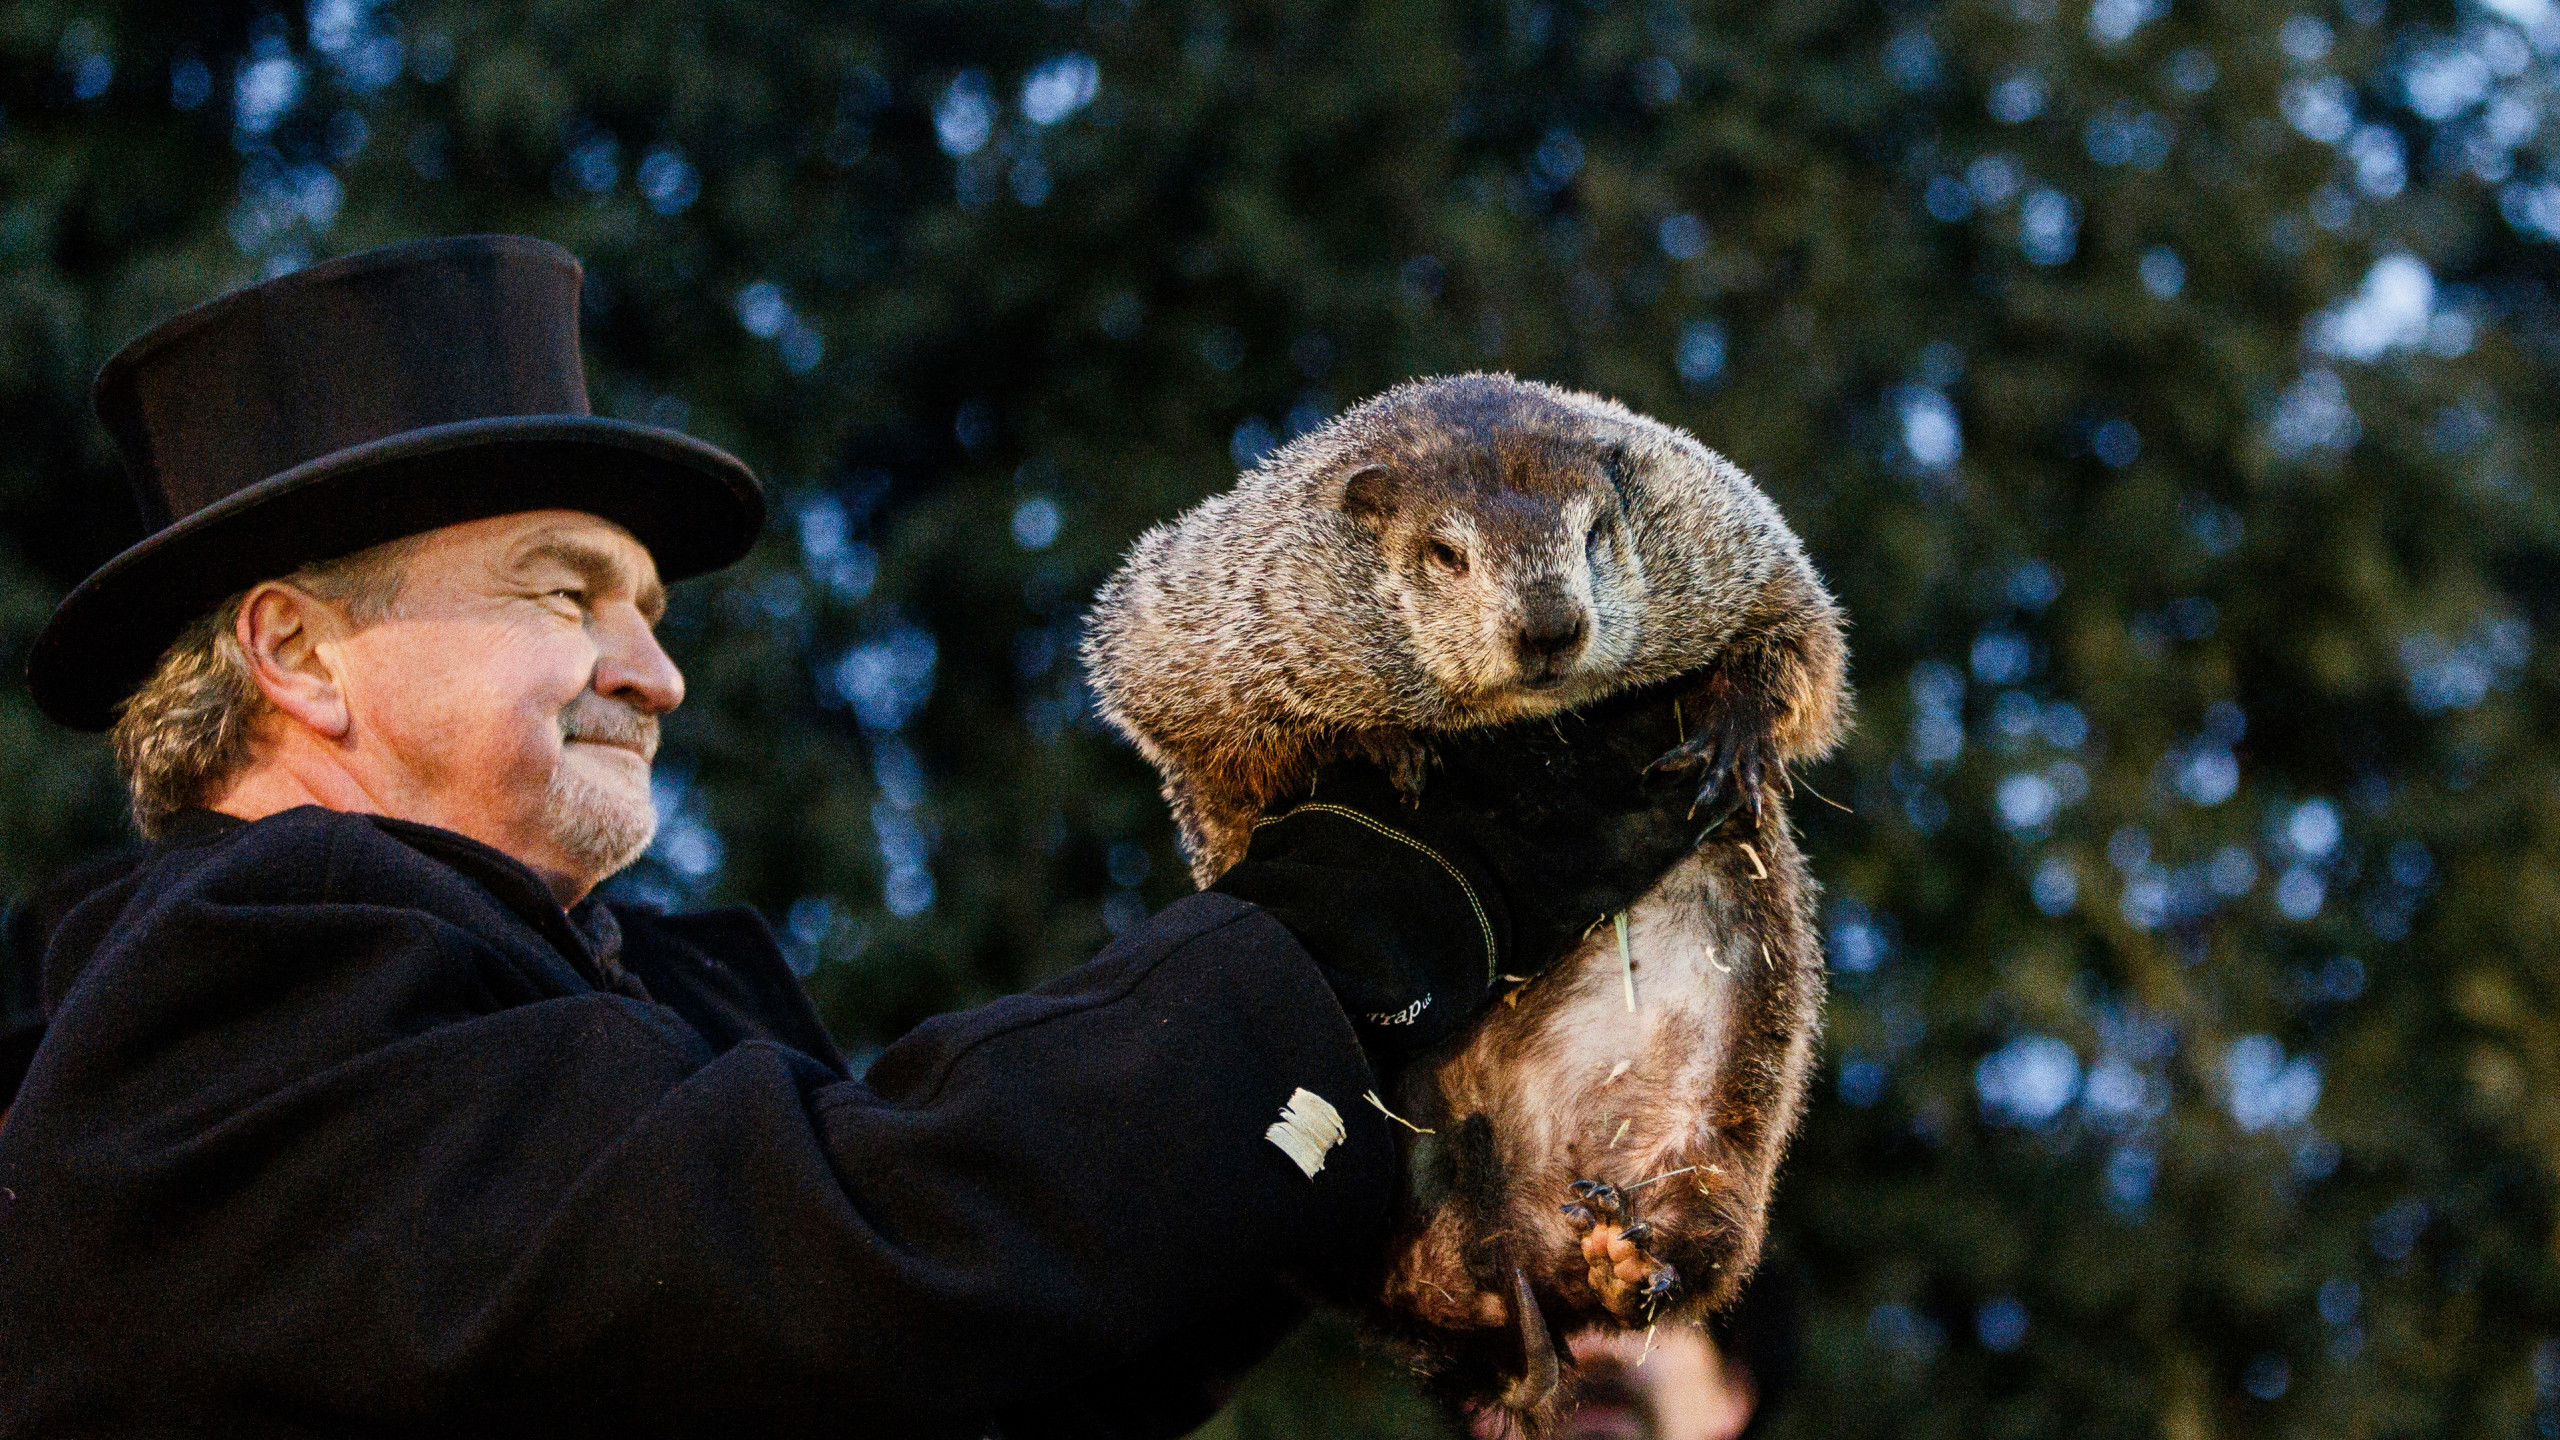 Punxsutawney Phil predicts an early spring on Groundhog Day